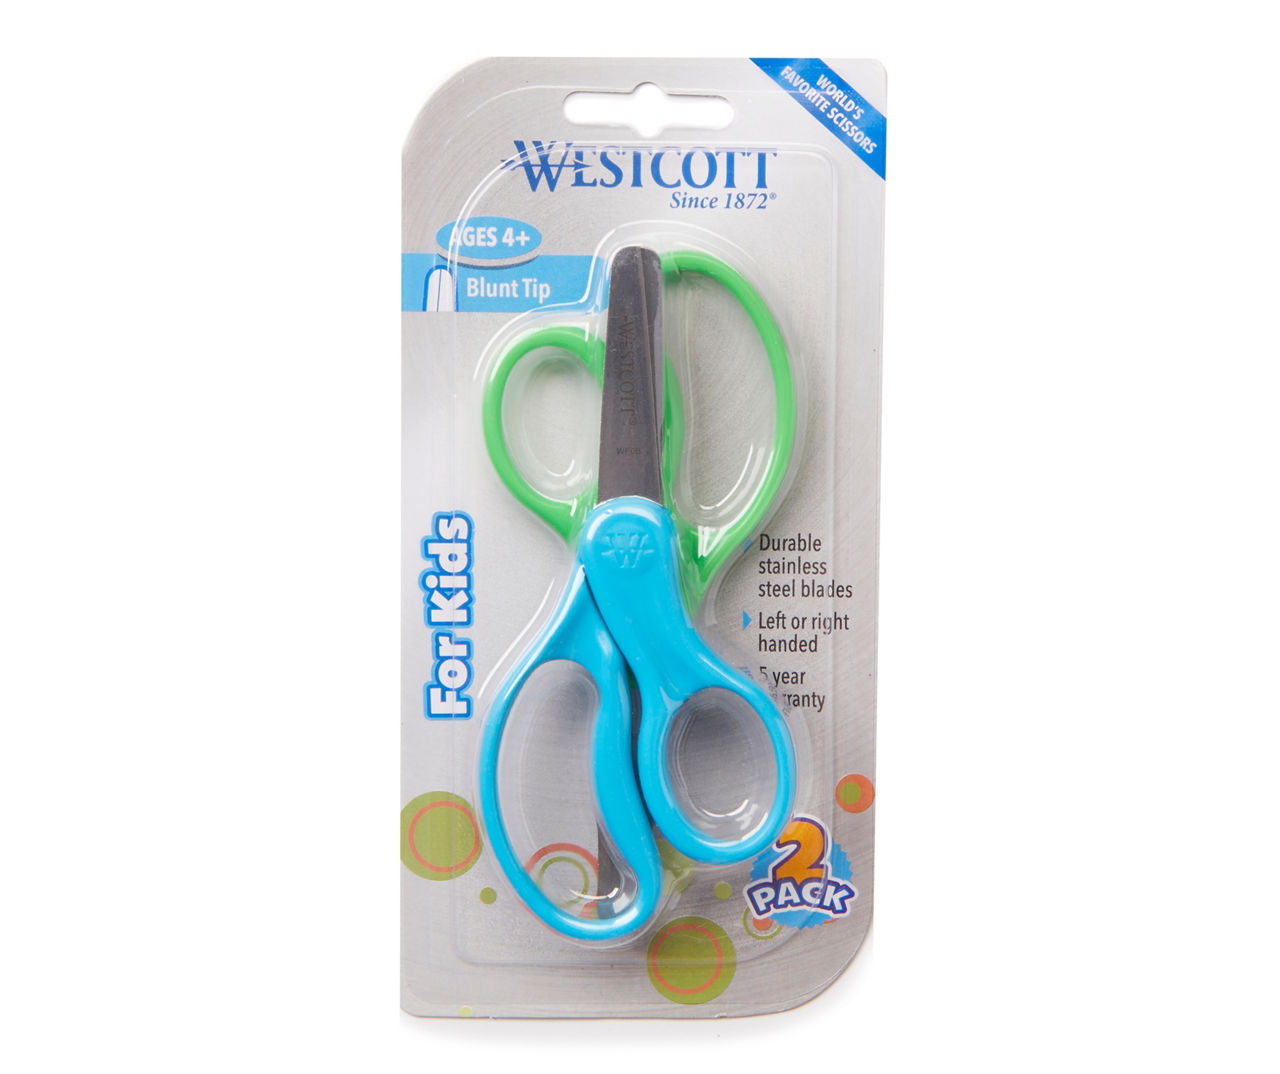 Kids Scissors 4 Count Pointed Kids Scissors Right and Left-Handed Scissors Variety Colors Scissors for School Kids Kid Scissors, Craft Scissors